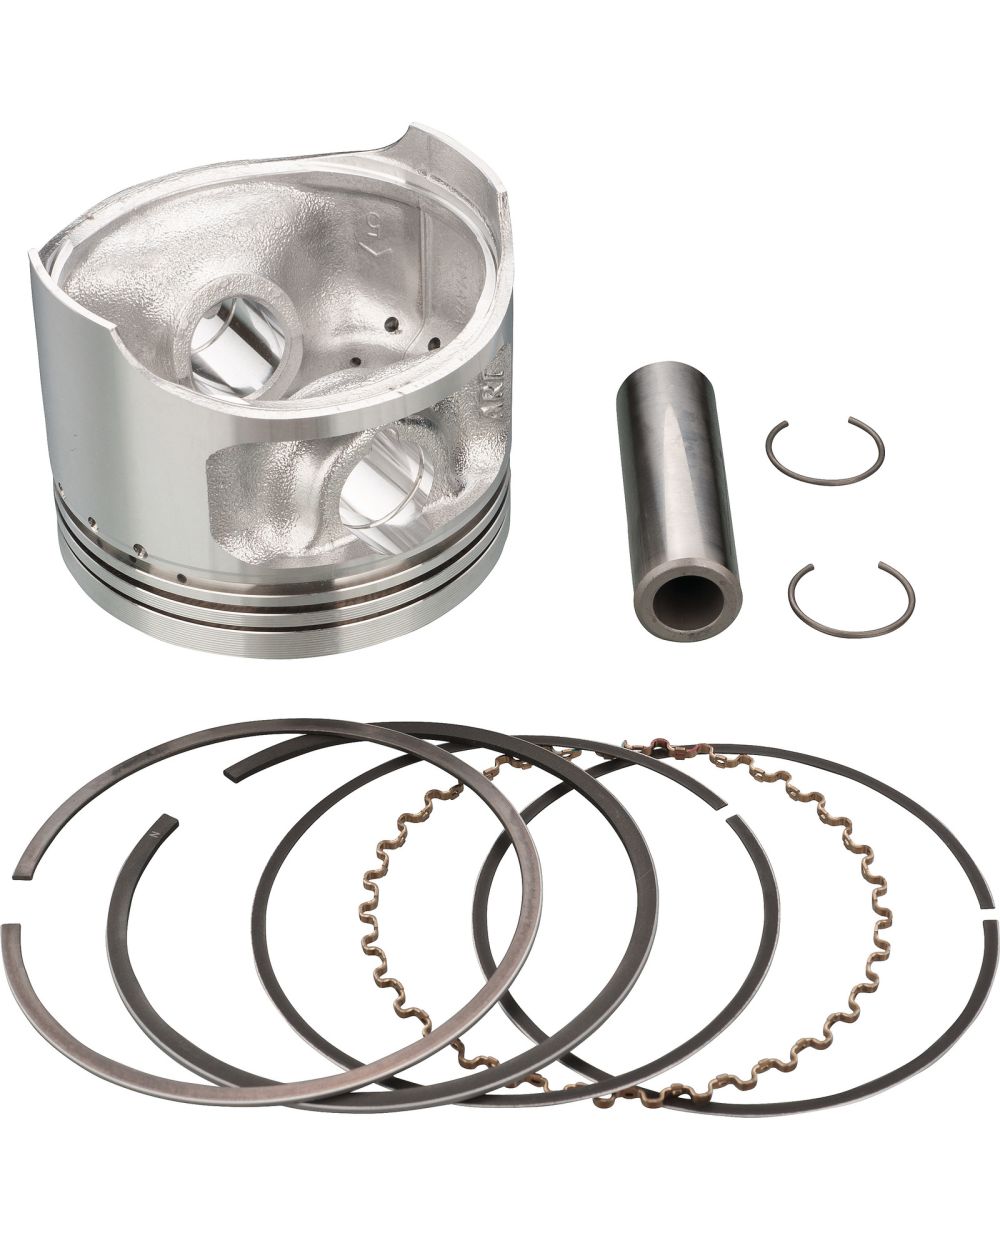 Motorcycle Piston Ring Pin Ring Kit For Honda CG-125 All Size Available